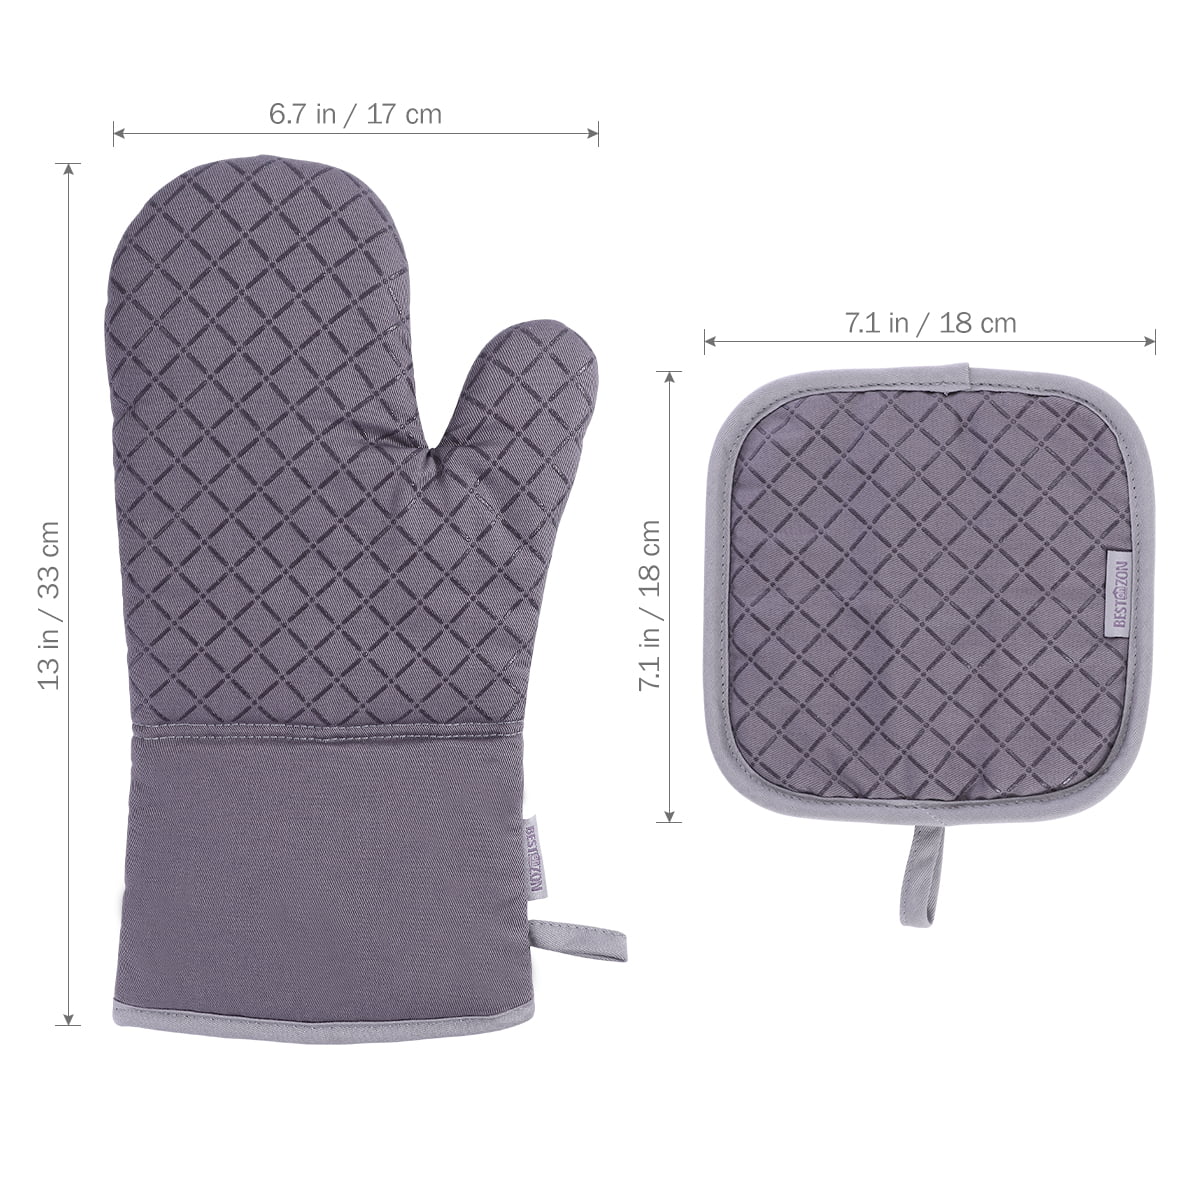 Details about   Wonderful Kitchen Dishes Silicone Oven Heat Insulated Finger Glove Protector SK 